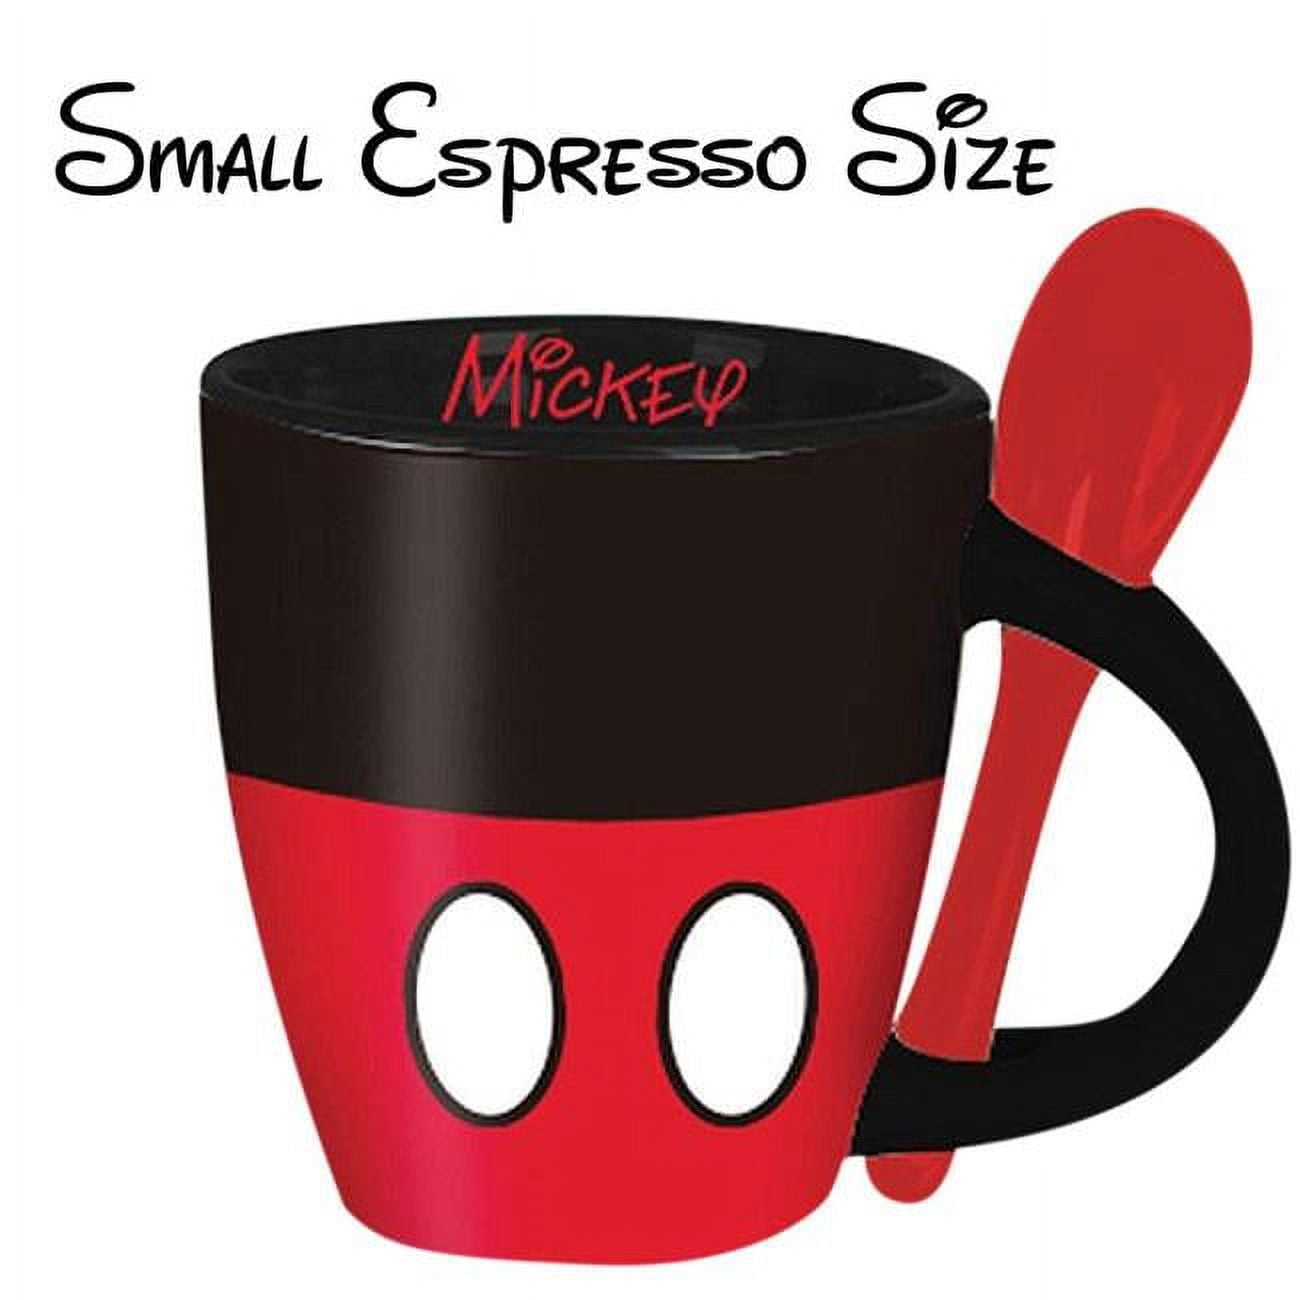 Disneyland Paris Mickey Mouse Espresso Cup With Spoon. Black, White & Red